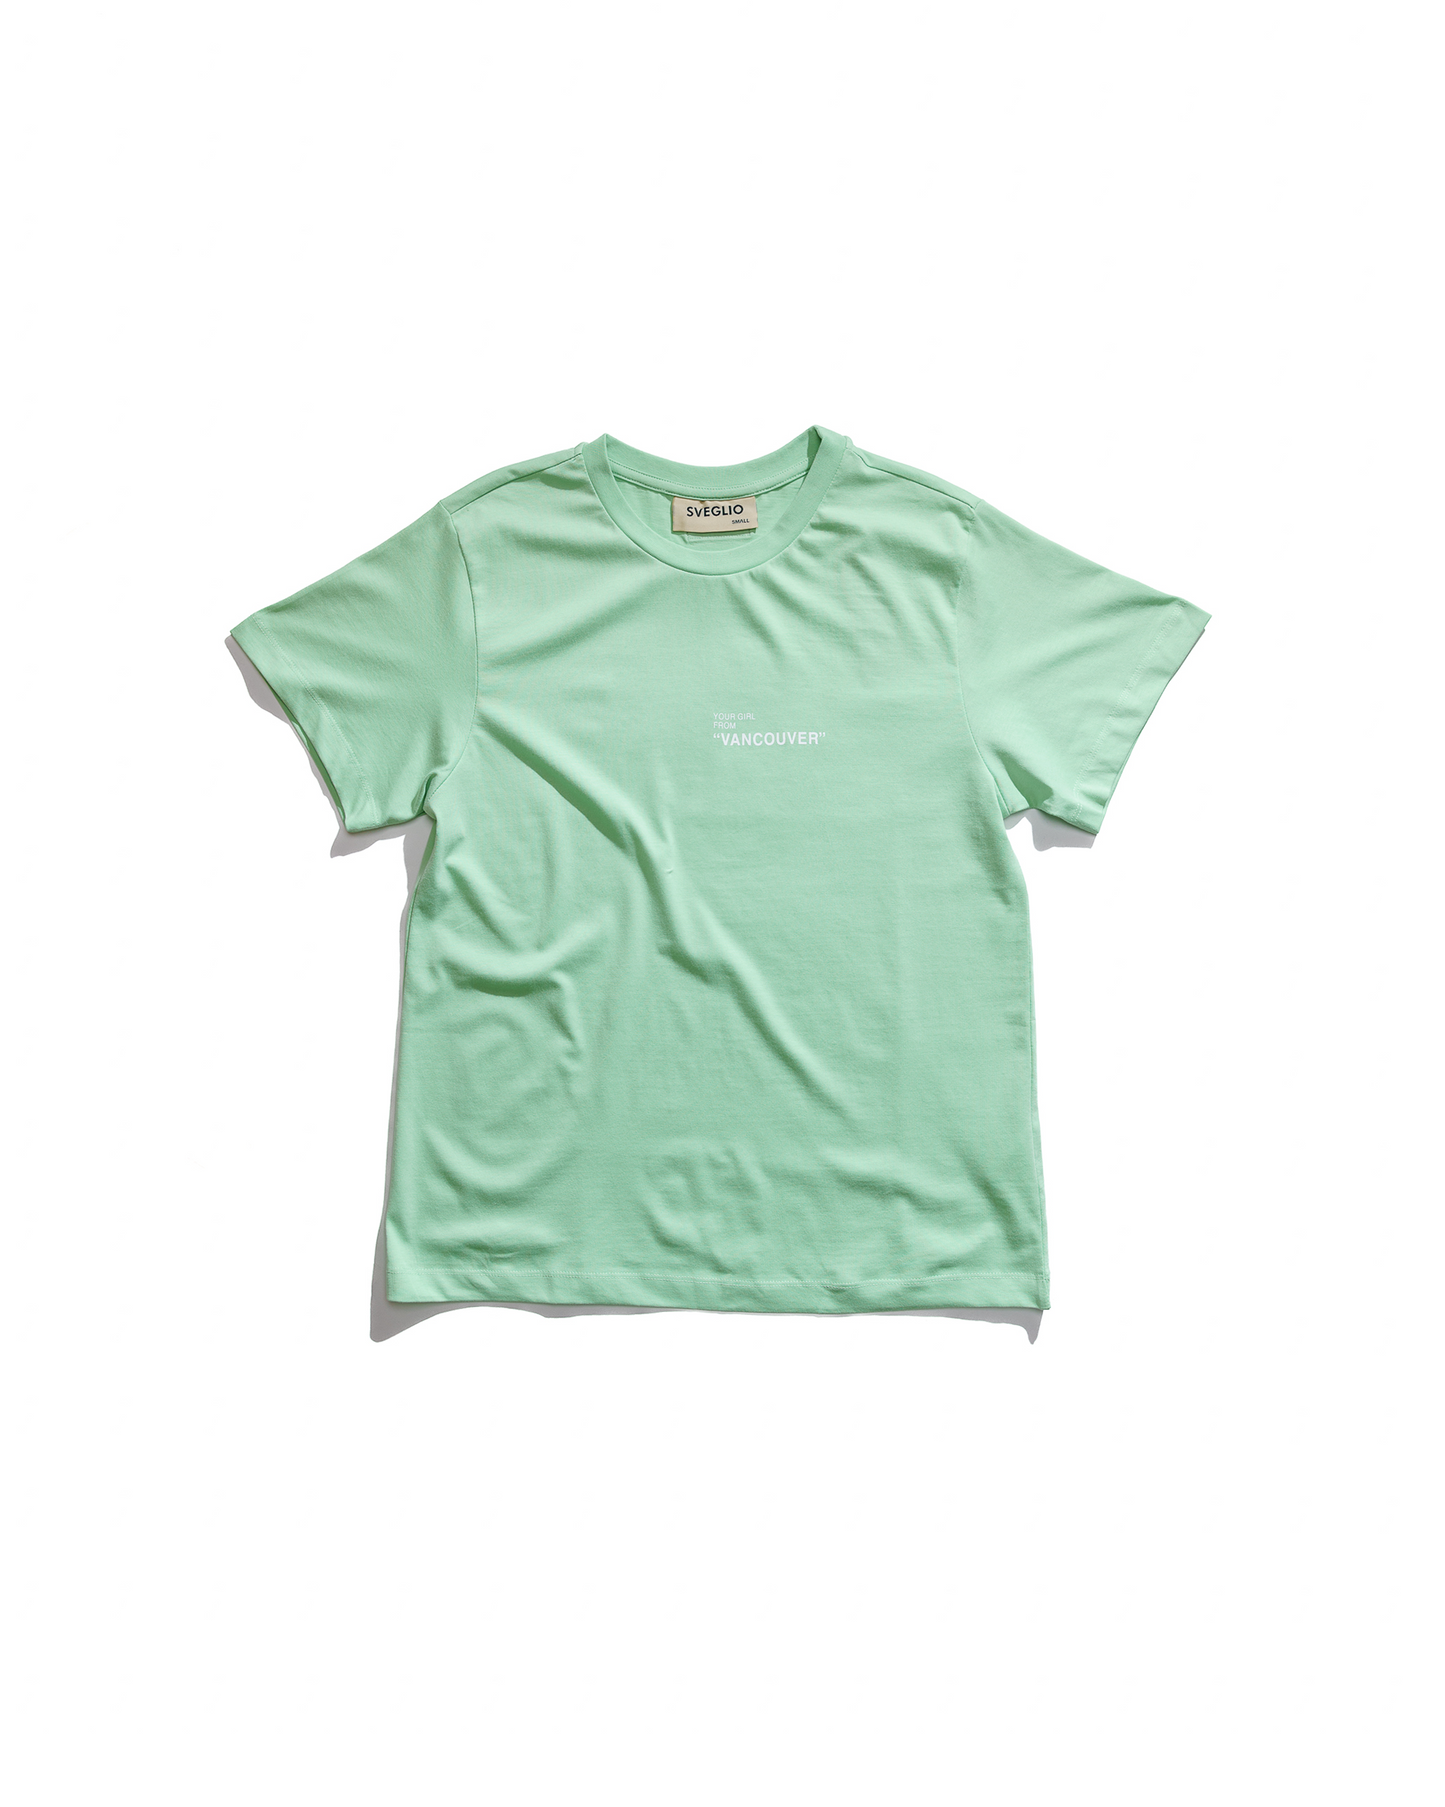 Your Girl from Vancouver T-shirt- Mint Green